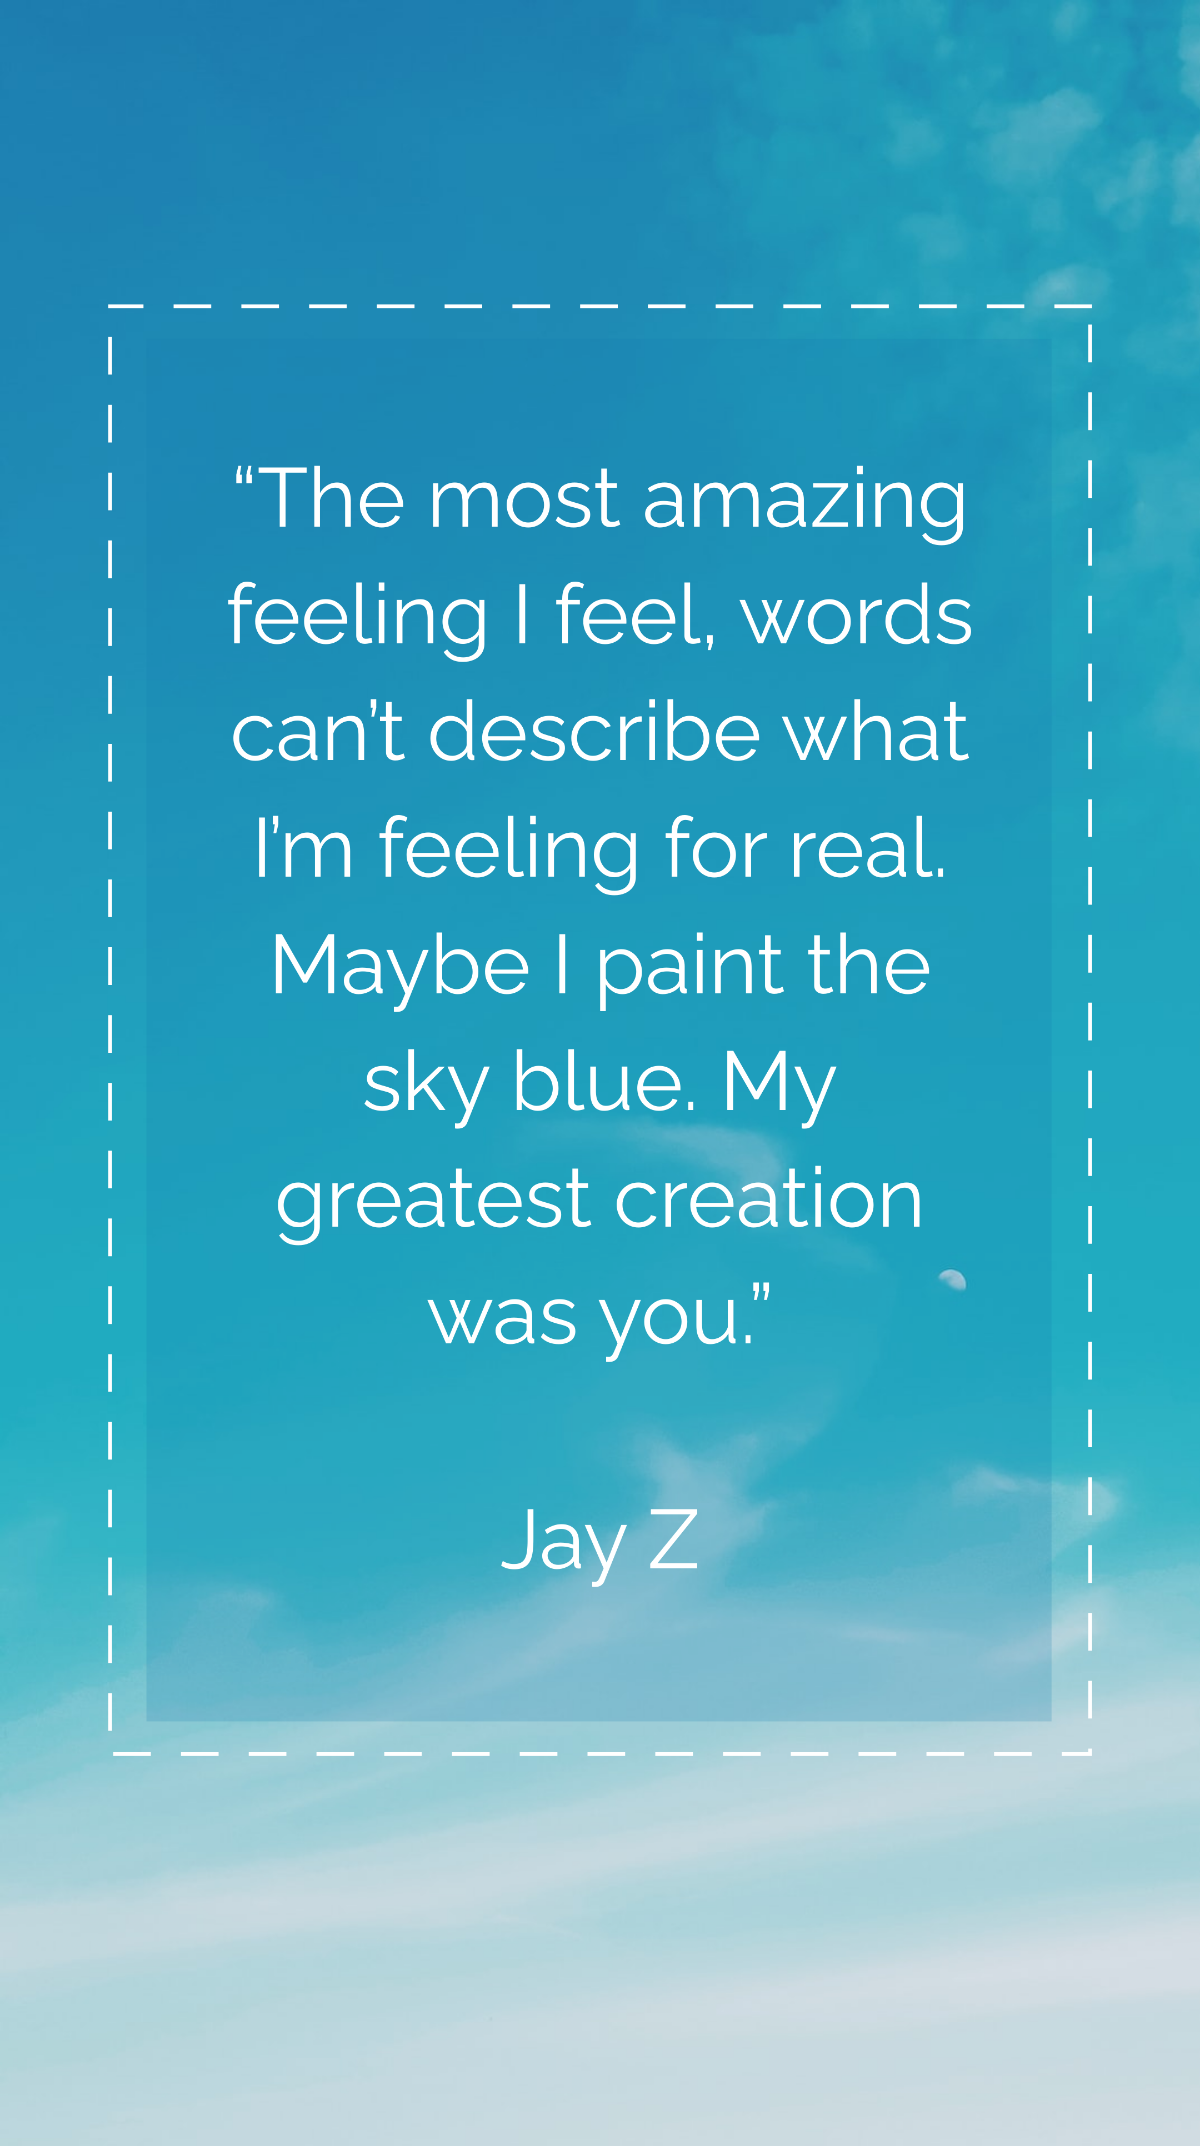 Jay Z - The most amazing feeling I feel, words can’t describe what I’m feeling for real. Maybe I paint the sky blue. My greatest creation was you. Template